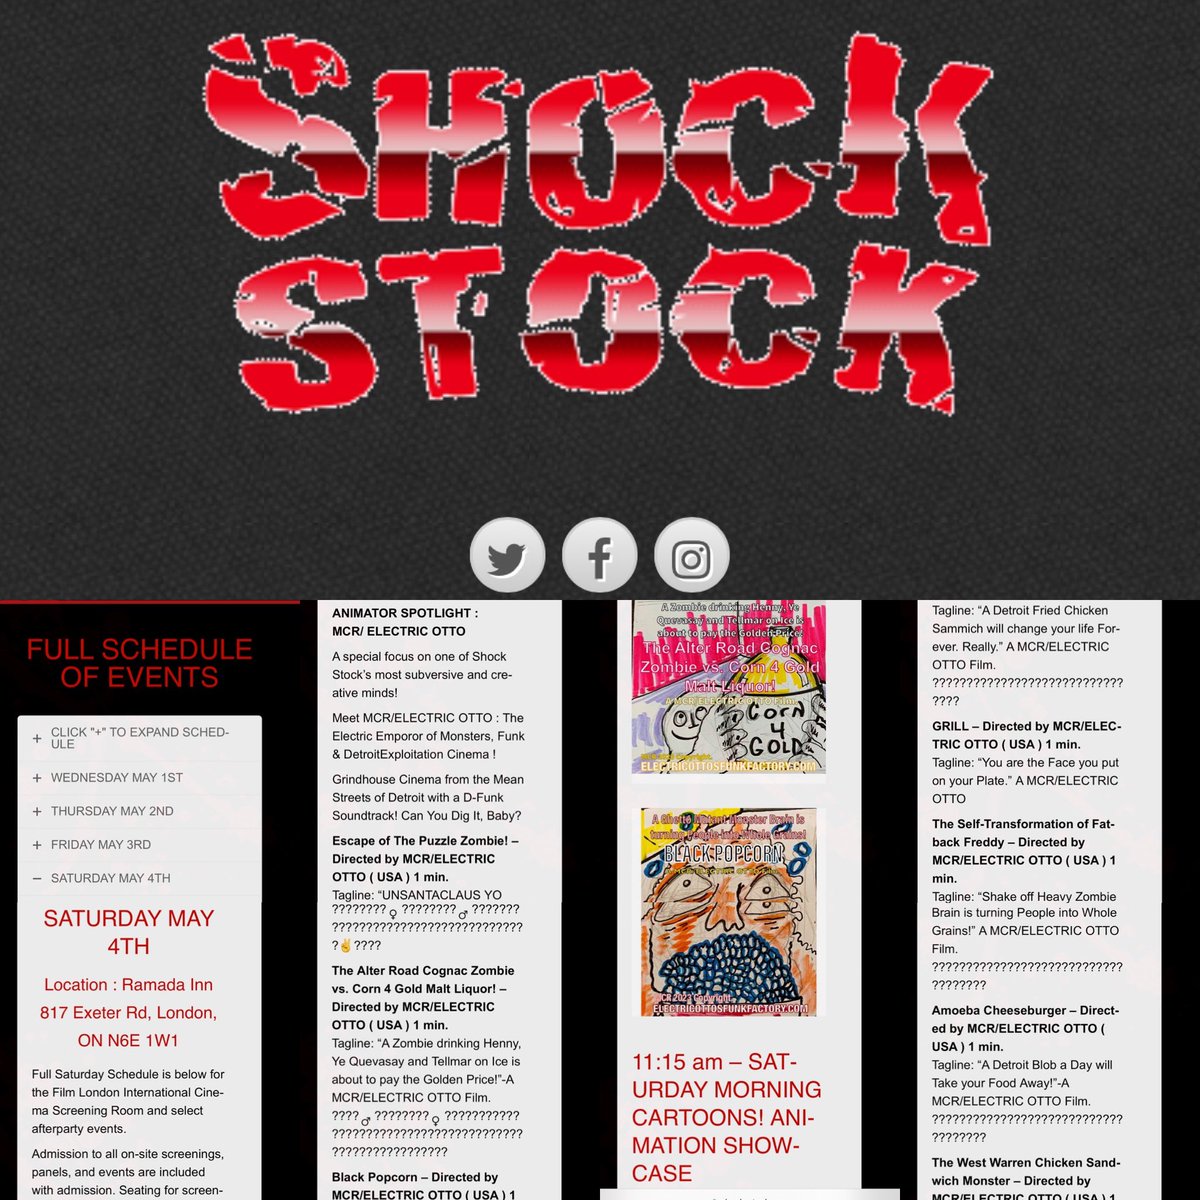 “Good News: 8 Detroitexploitation #ShortFilms Screening @SHOCK_STOCK #filmfest 2024!

Not so Good News: Won’t Be There in Person this Year 😞😖😫!! Will be there in Spirit. 

Thanks #ShockStock for the Support!
Detroitexploitation #Funk/Cinema #Worldwide!”-MCR/ELECTRIC OTTO